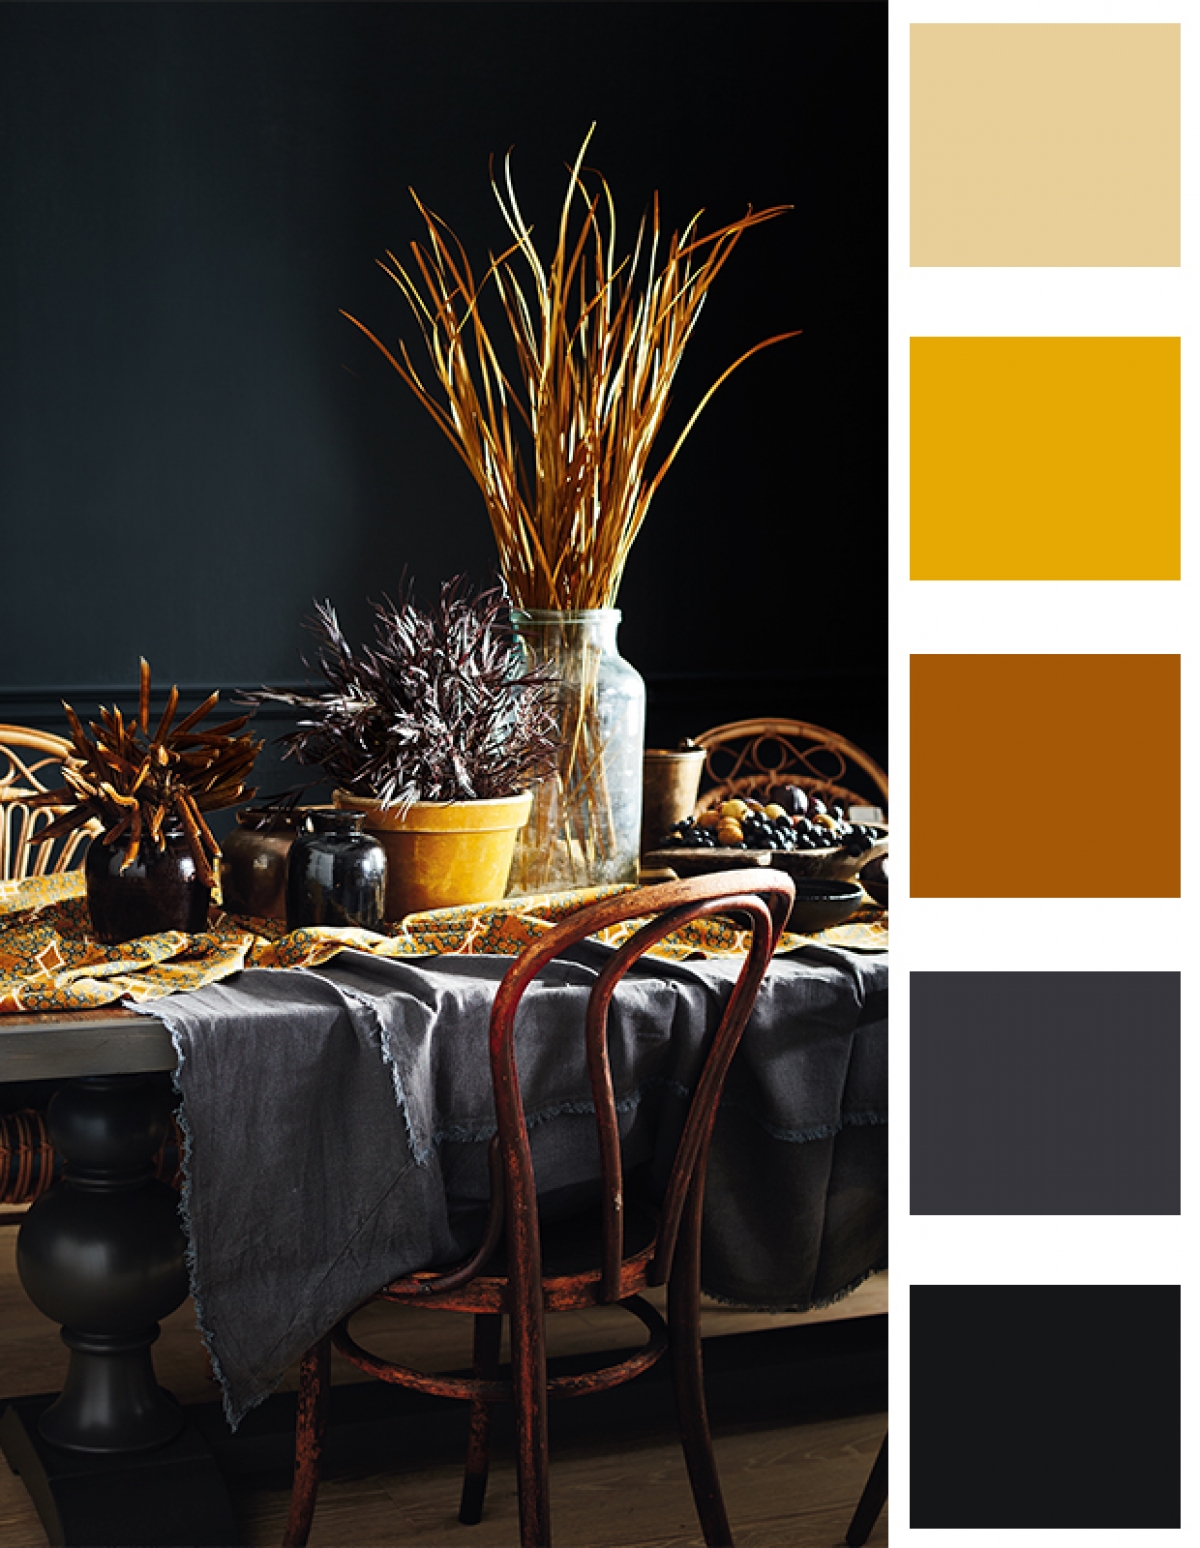 Autumn dining table with contrasting decorative objects.